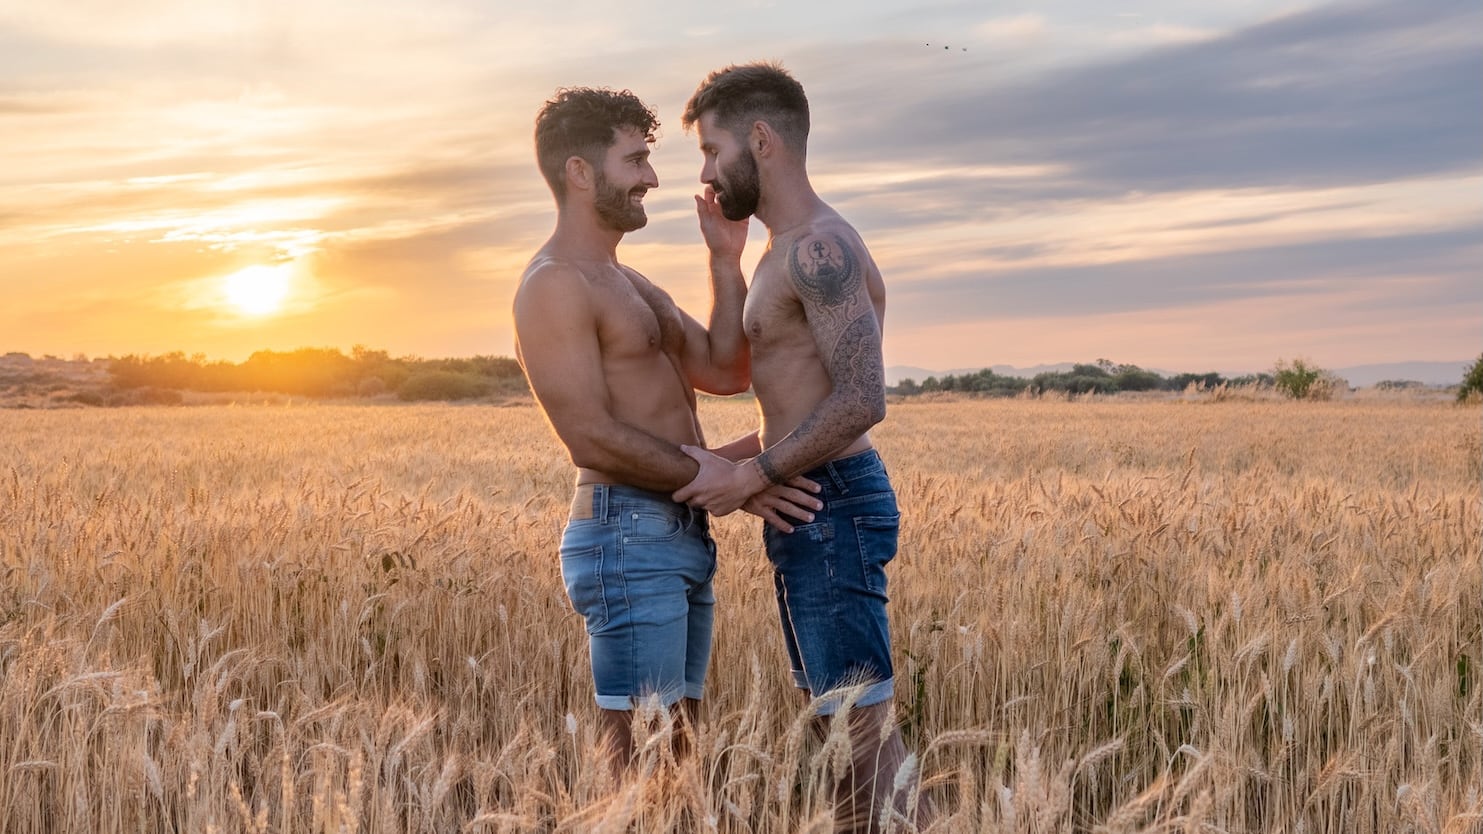 Gay couple embracing at sunset in a wheat field.